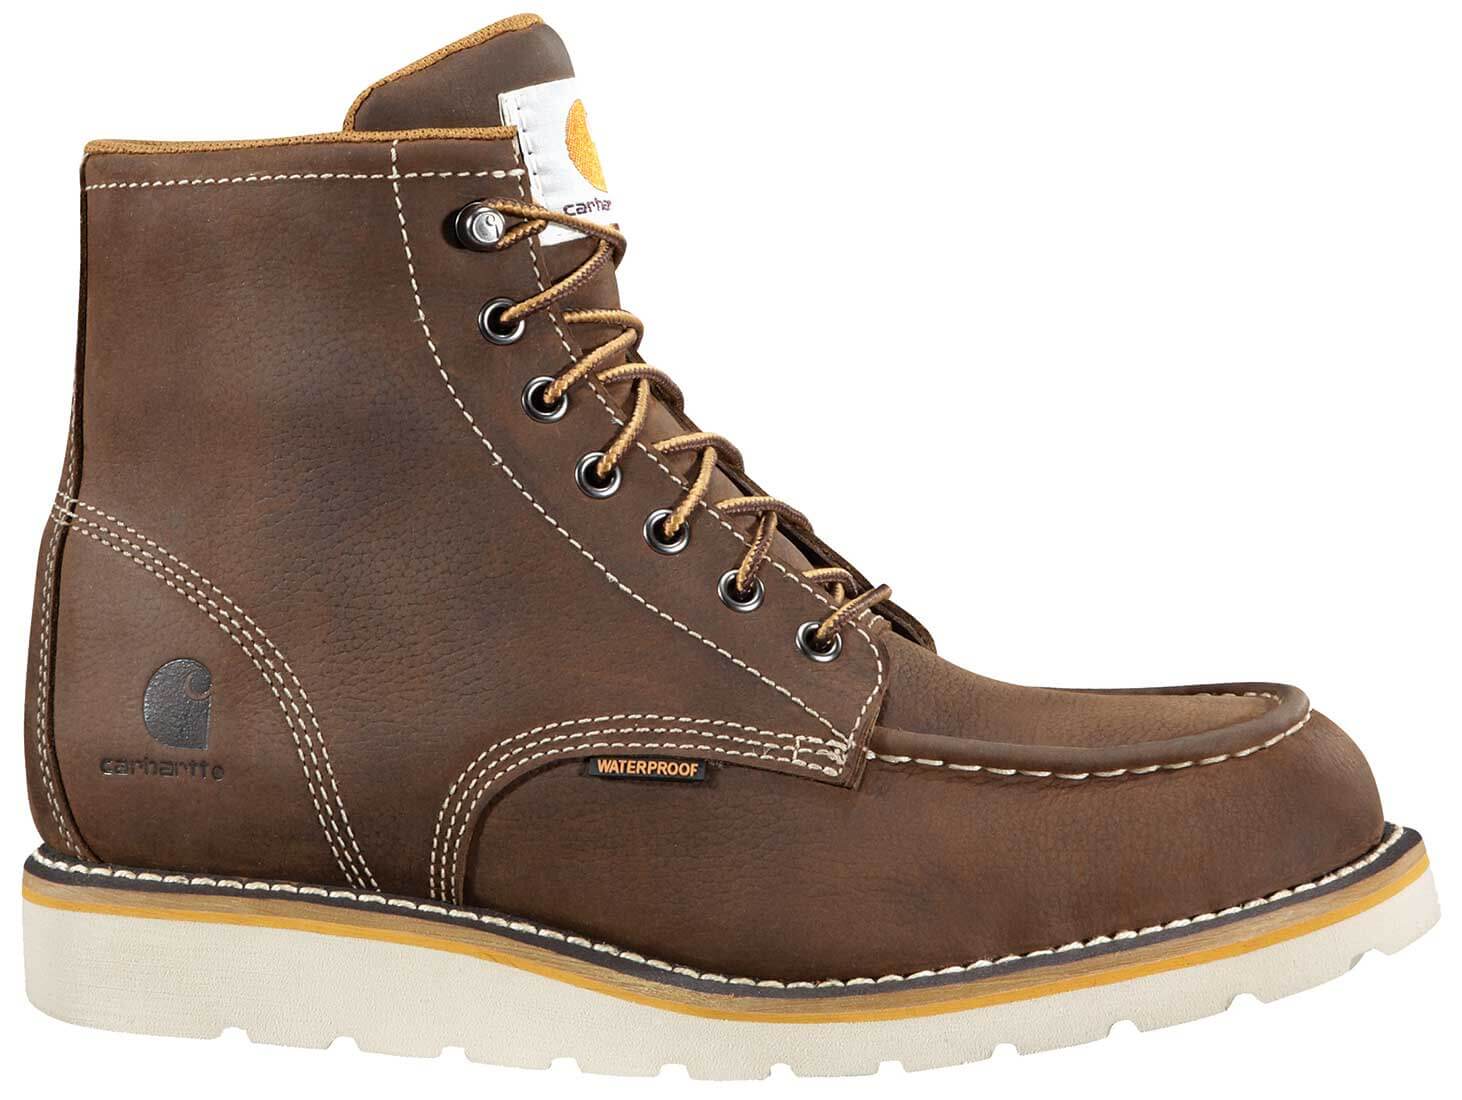 Carhartt - CMW6095 - Men's Brown Leather Waterproof Moc-Toe Wedge Soft Toe 6 Lace-up Work Boot